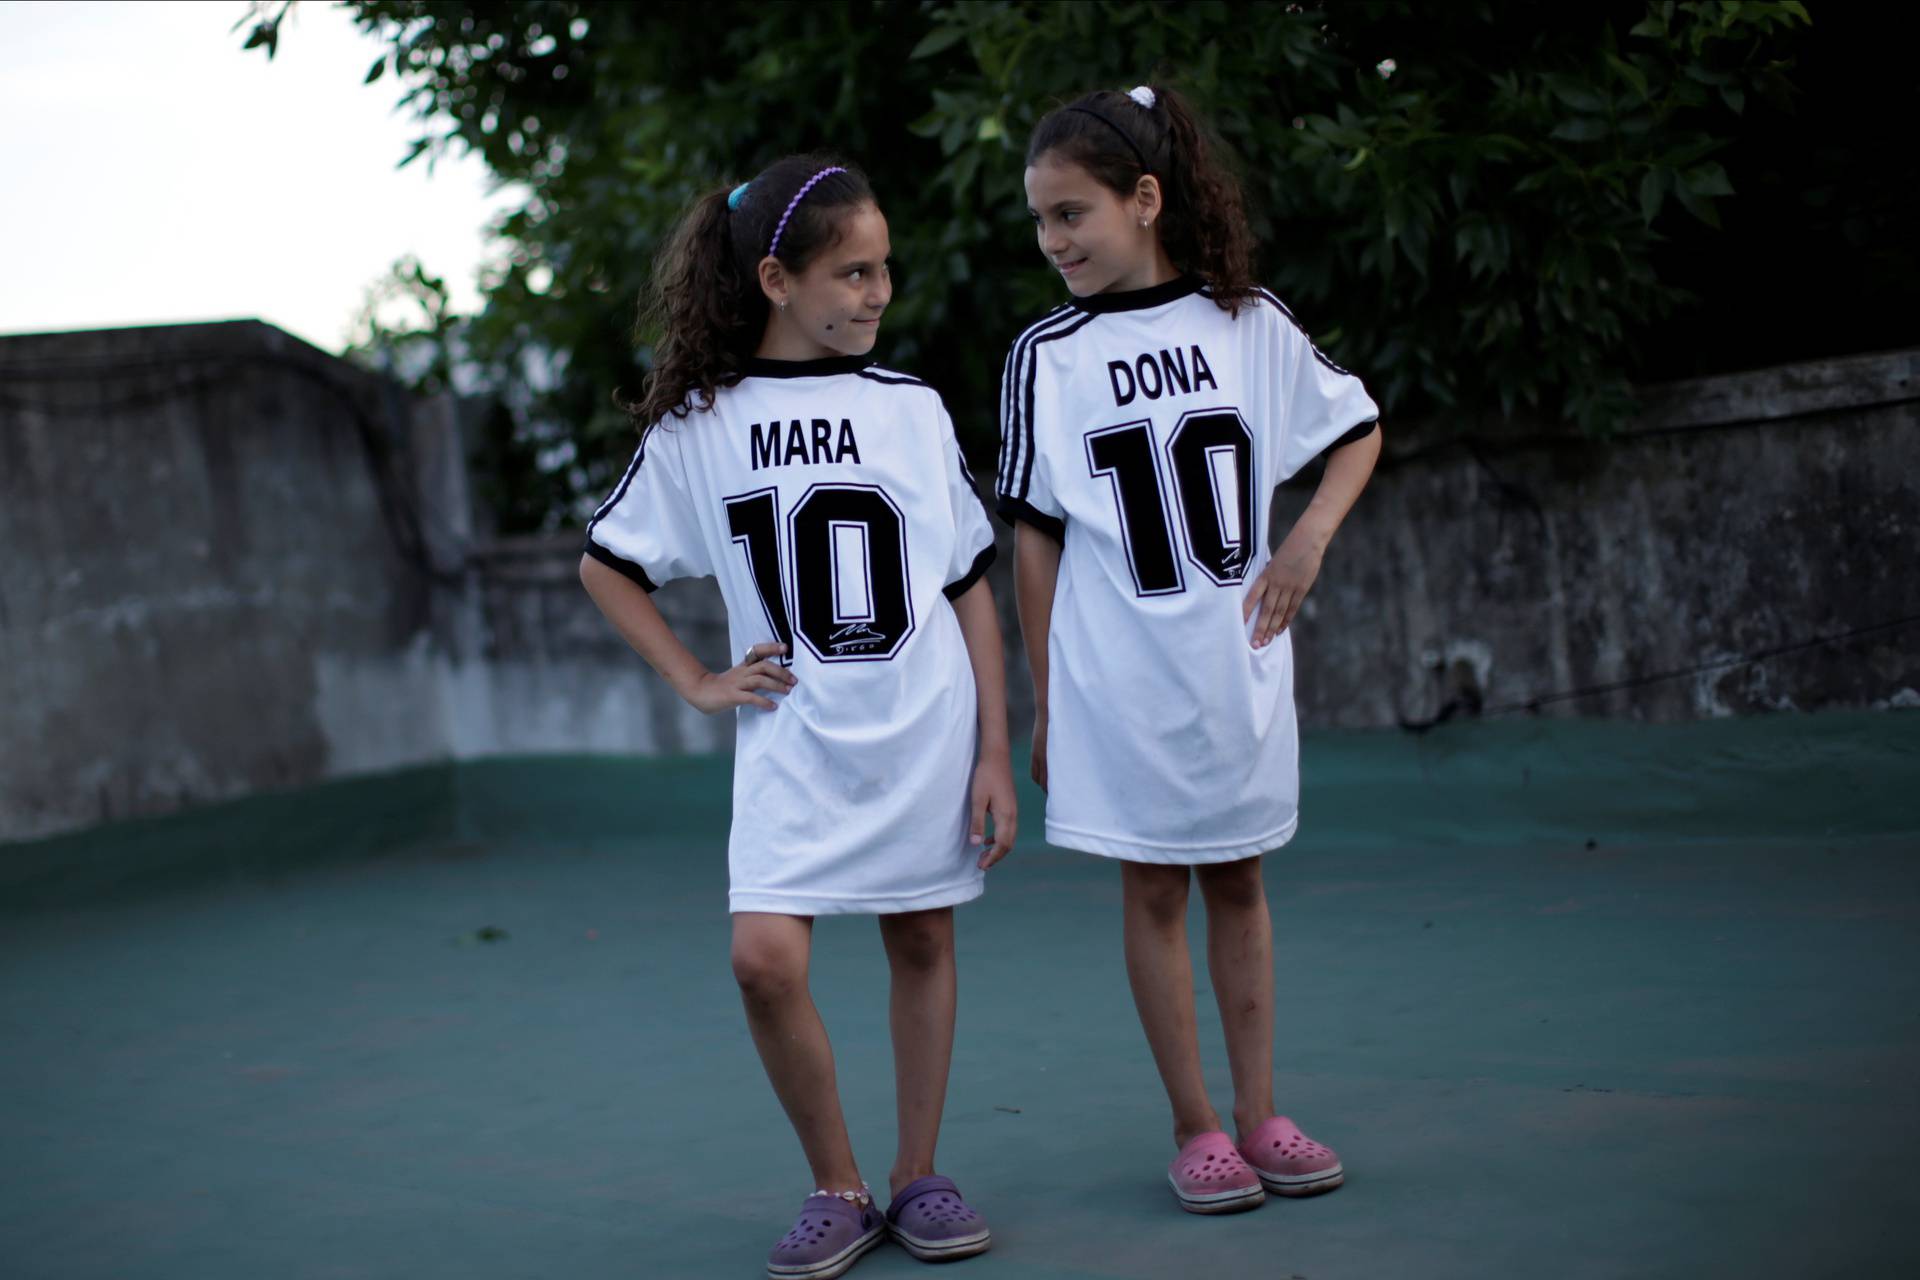 Mara and Dona, twin daughters of Walter Gaston Rotundo, a devoted Diego Maradona fan who named his daughters after the soccer star, pose for photos at their house, in Buenos Aires